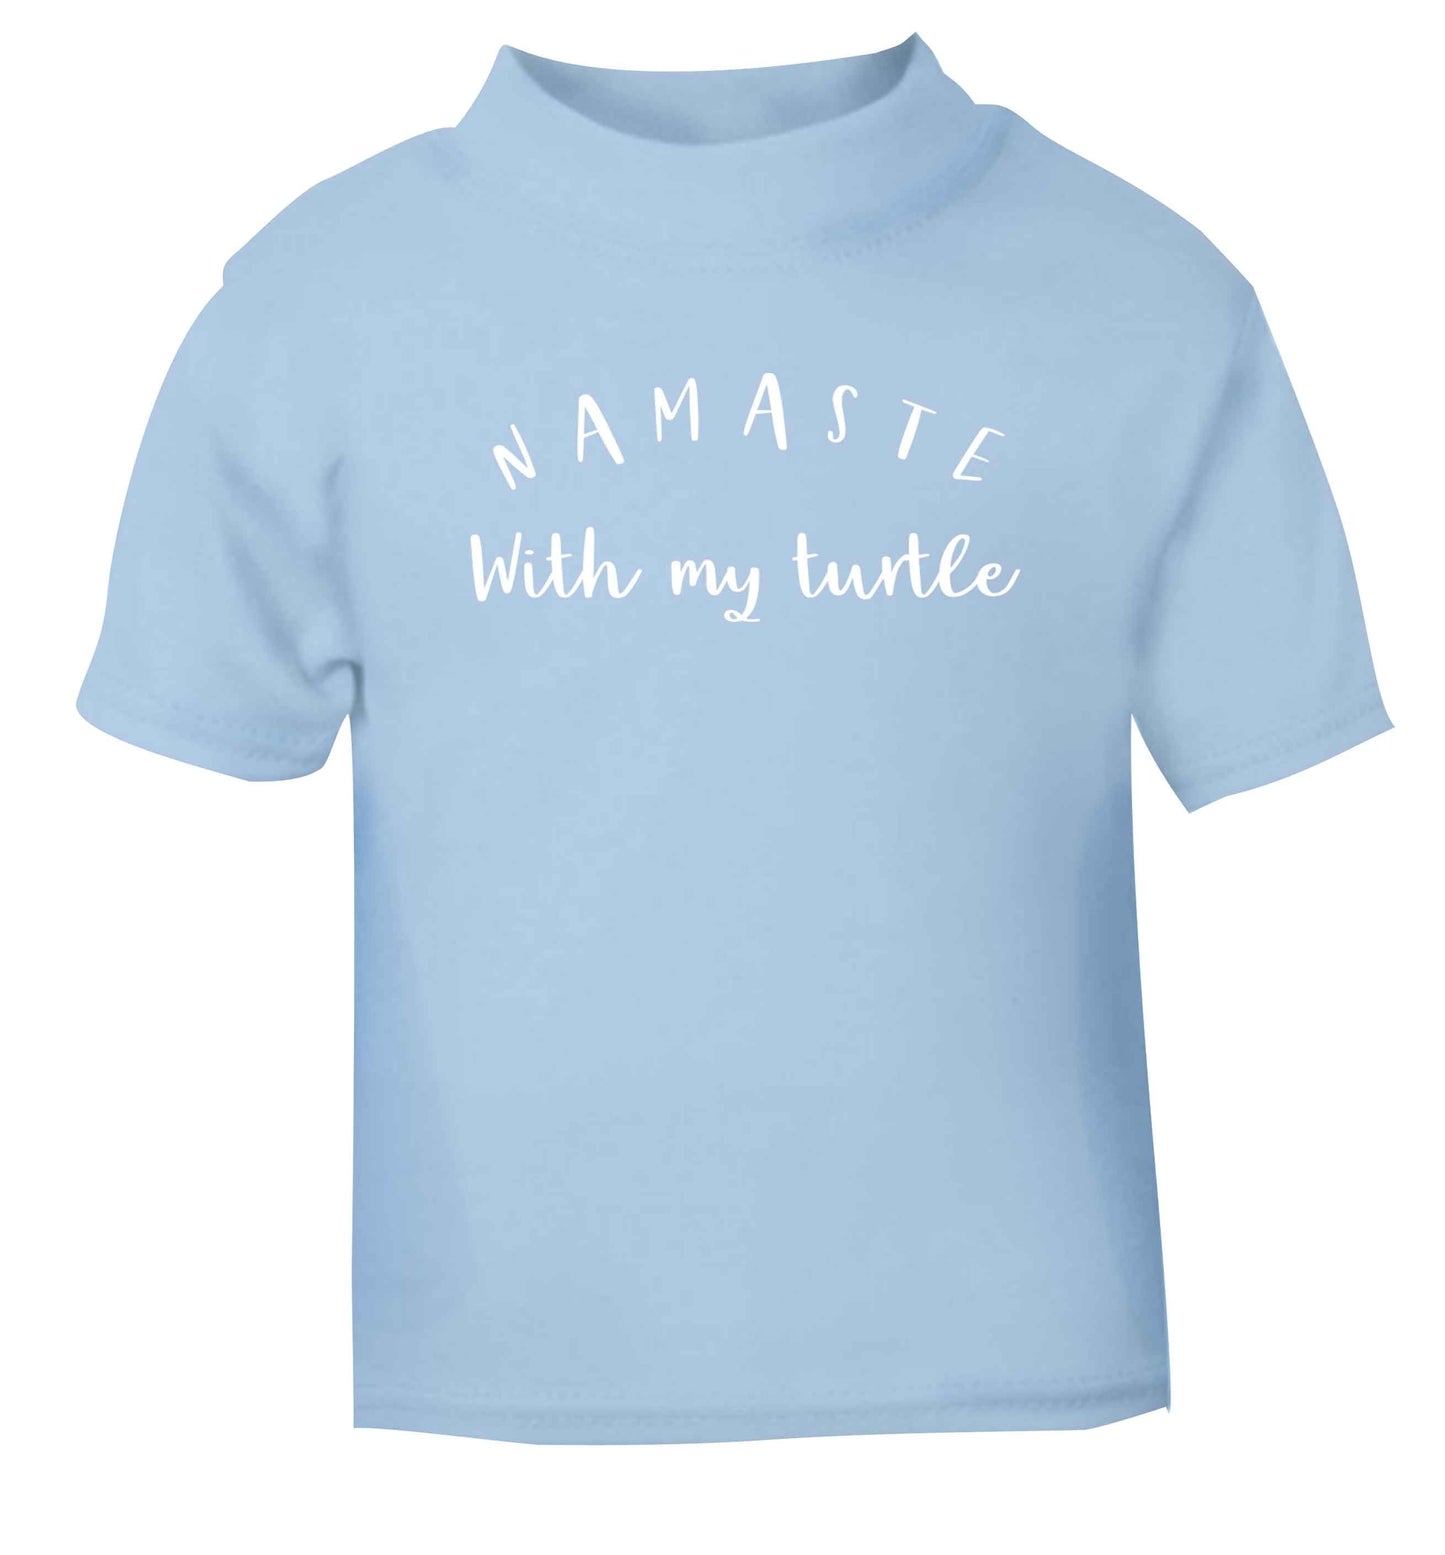 Namaste with my turtle light blue Baby Toddler Tshirt 2 Years